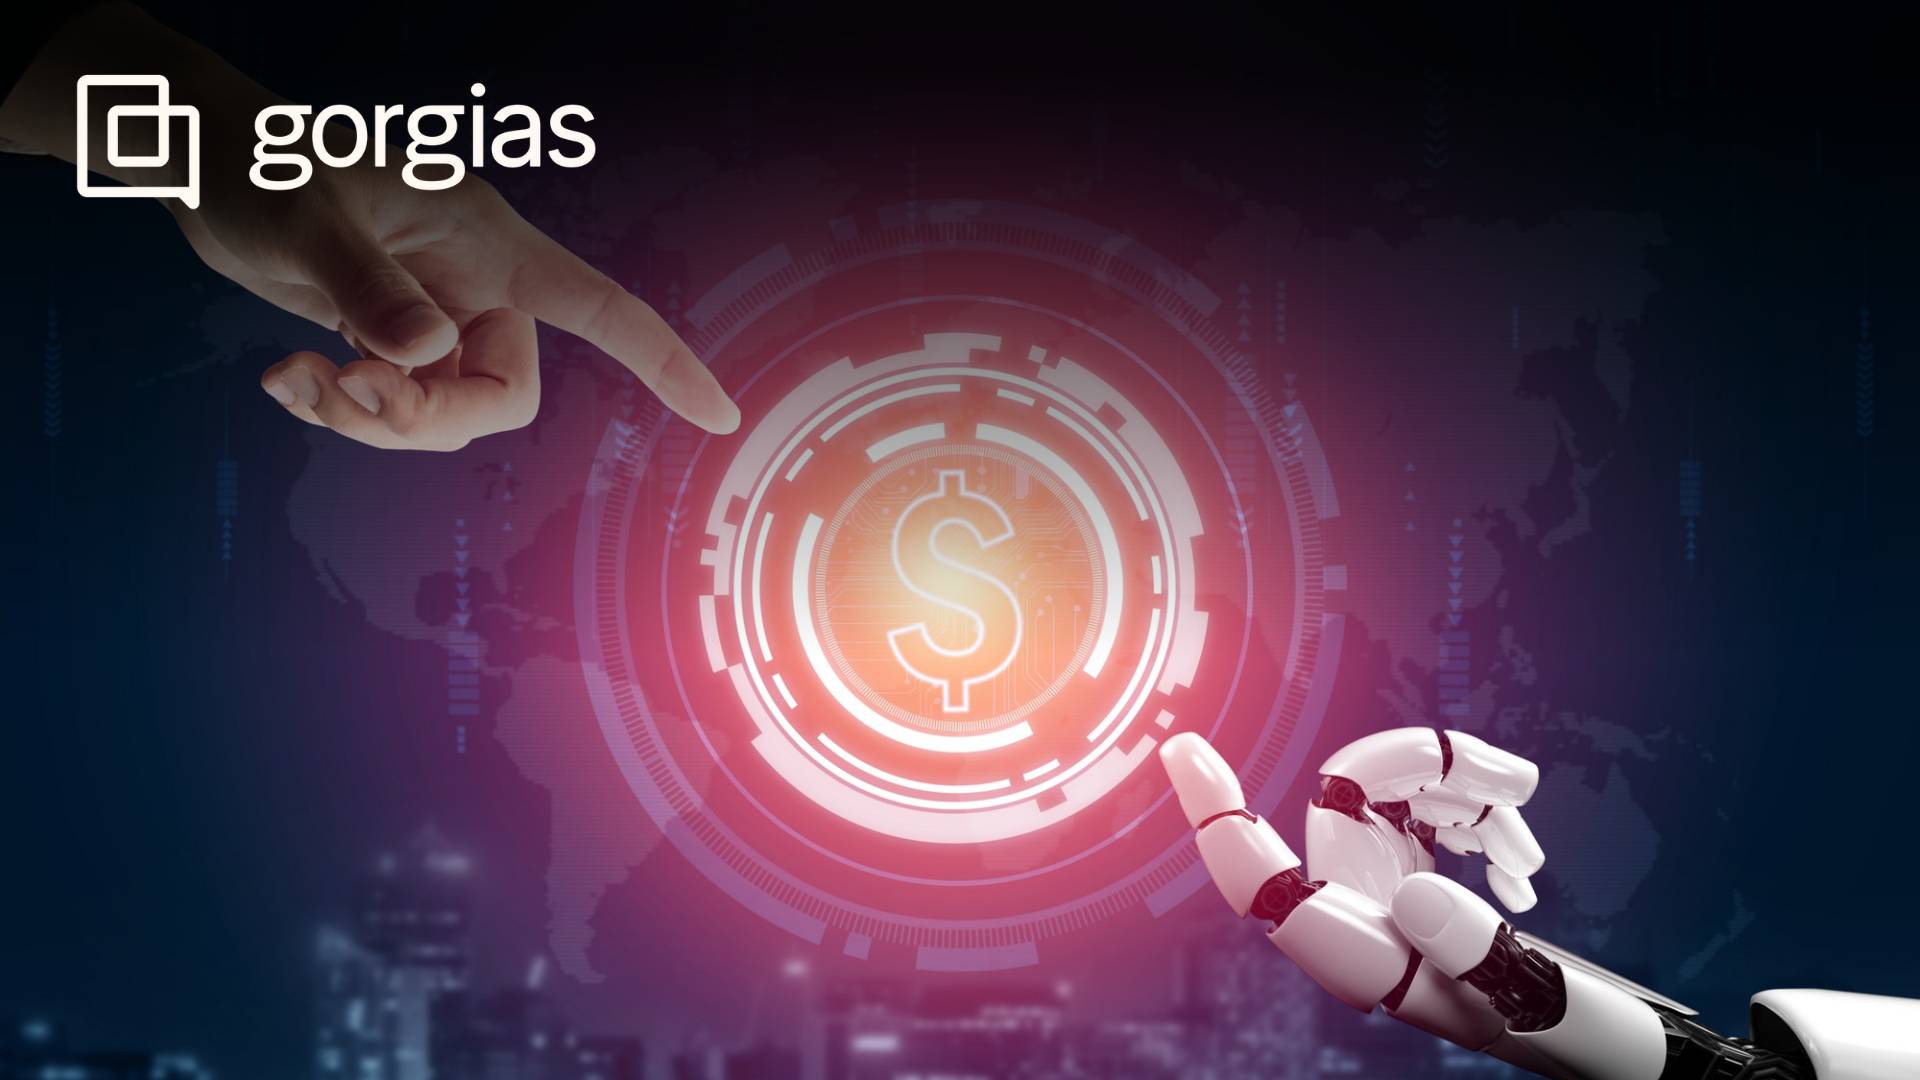 Gorgias Secures $29M to Revolutionize Ecommerce Customer Experience with AI